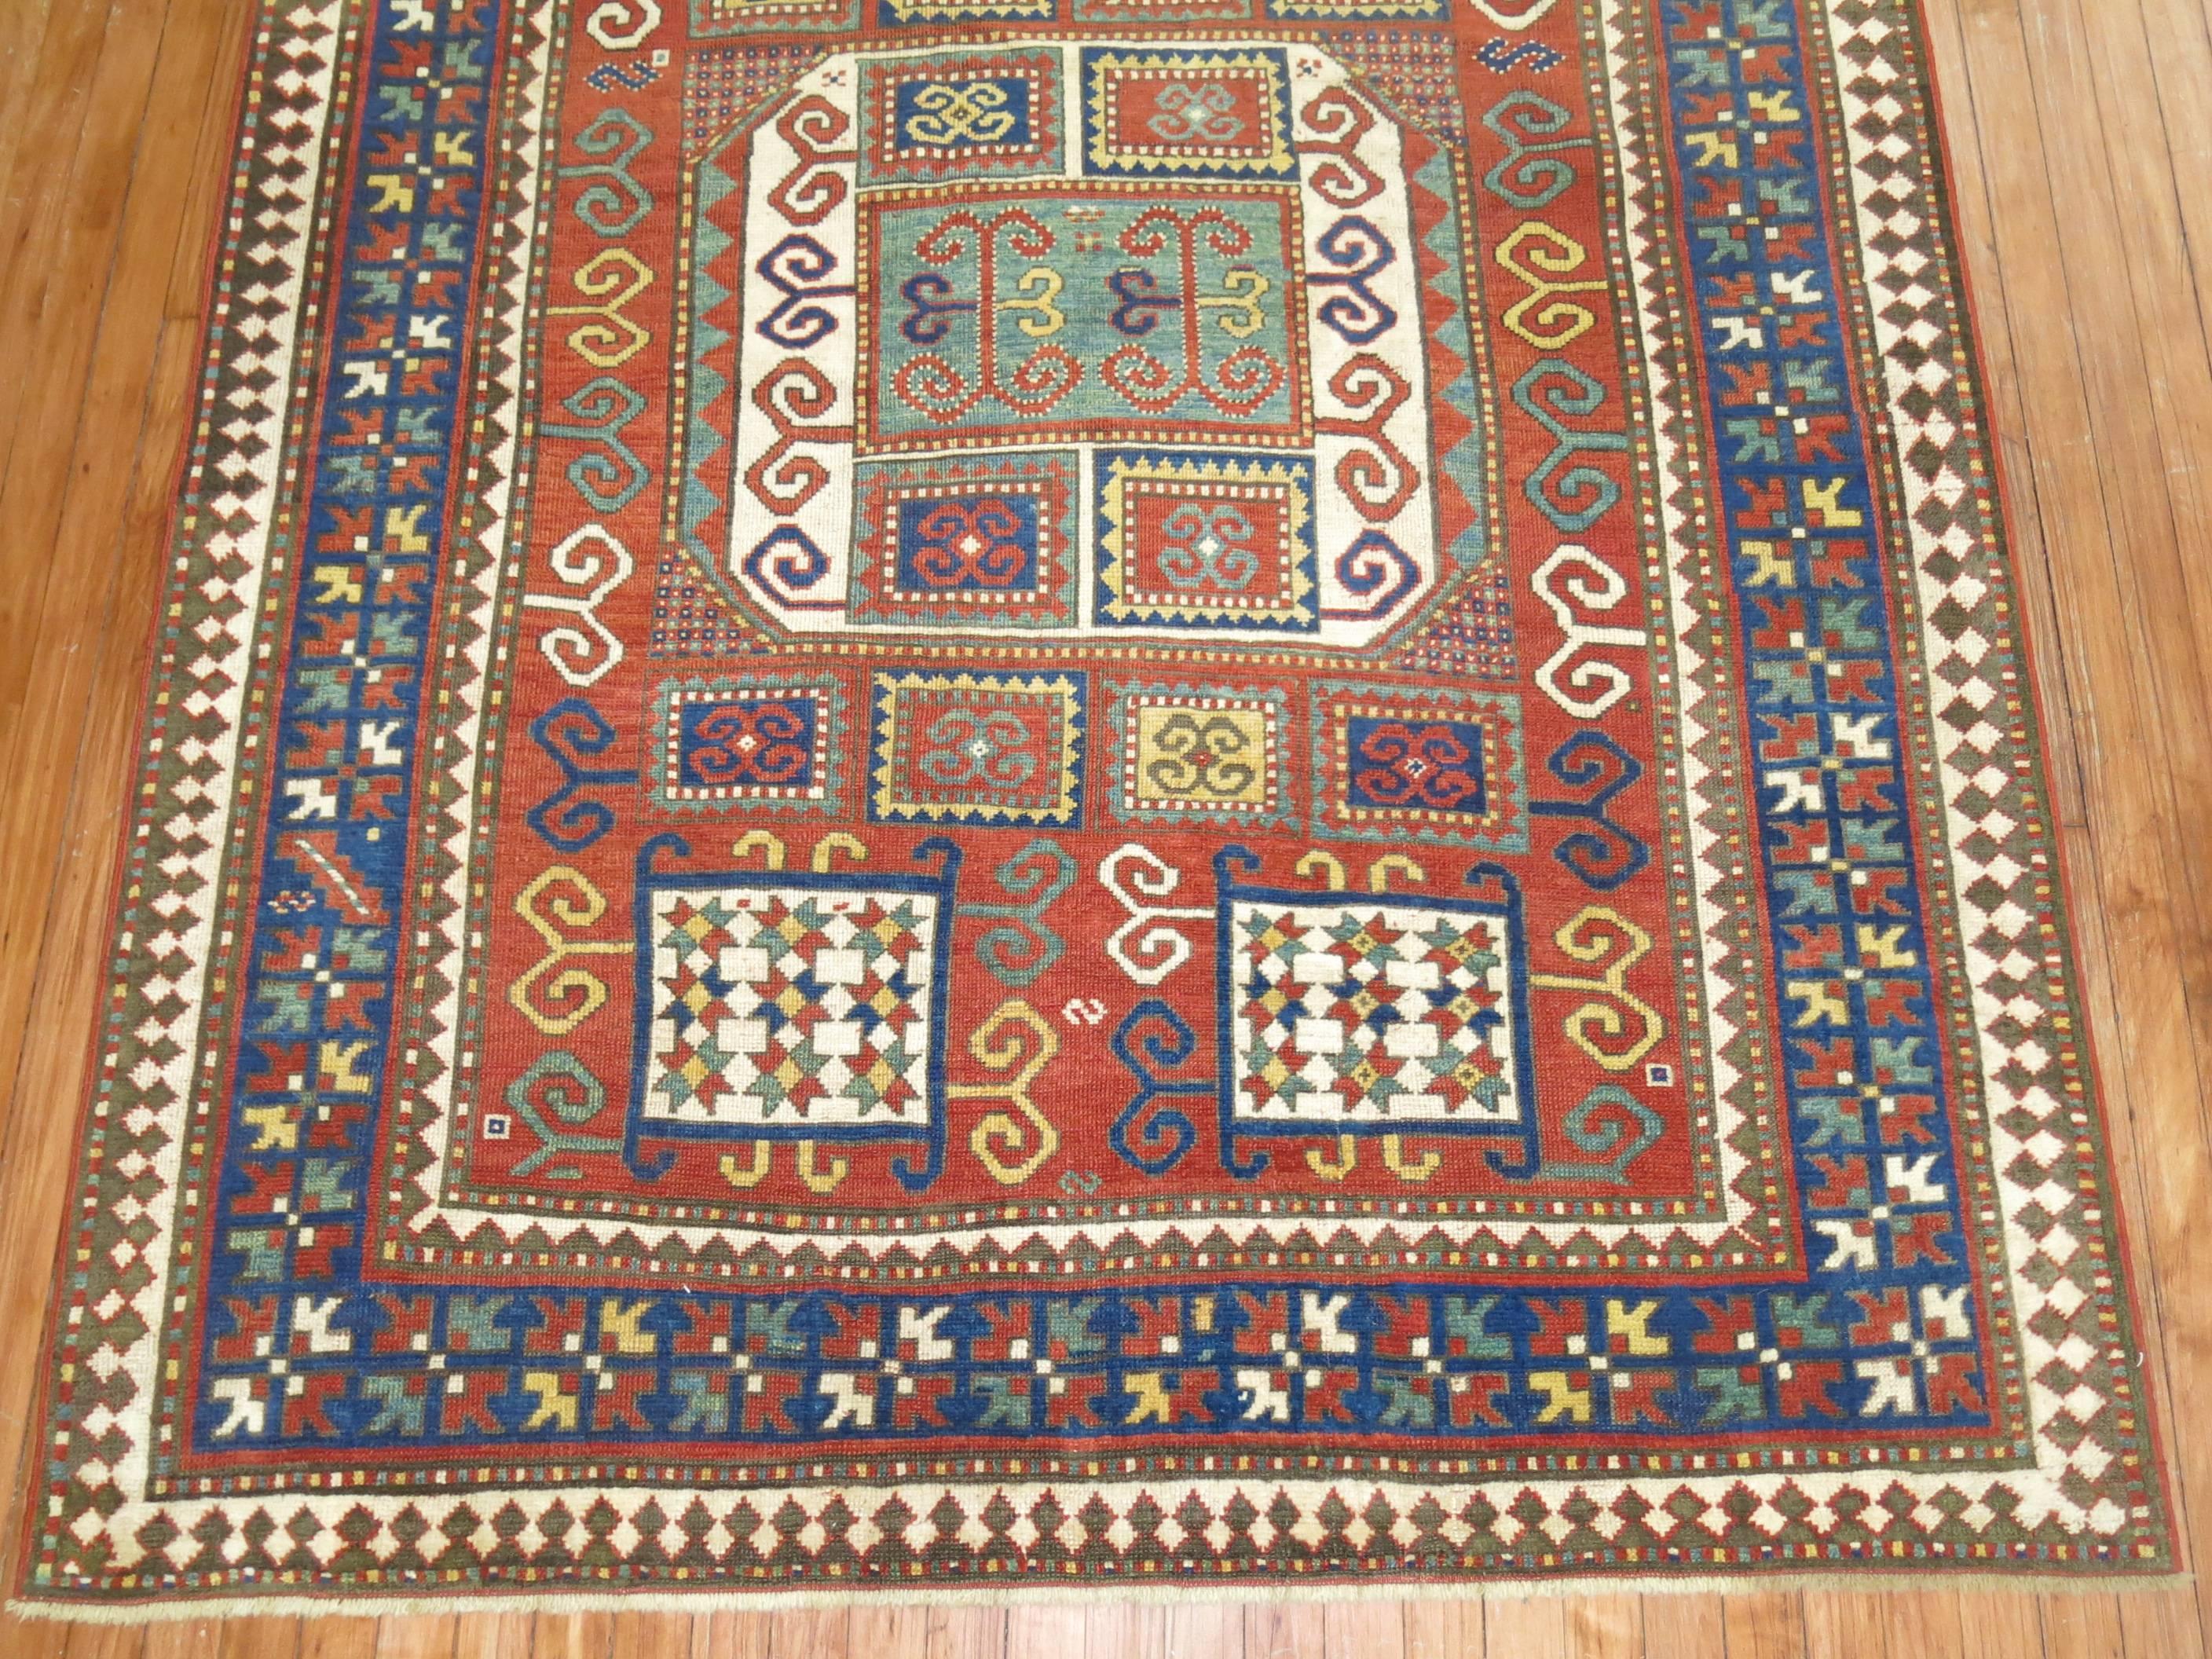 An early 20th century rare intermediate size Caucasian Karachopt Kazak rug.

Karachopt Kazaks have grown to become an icon of Caucasian village weaving. This red ground example has a number of distinguishing features, among which a soft, silky